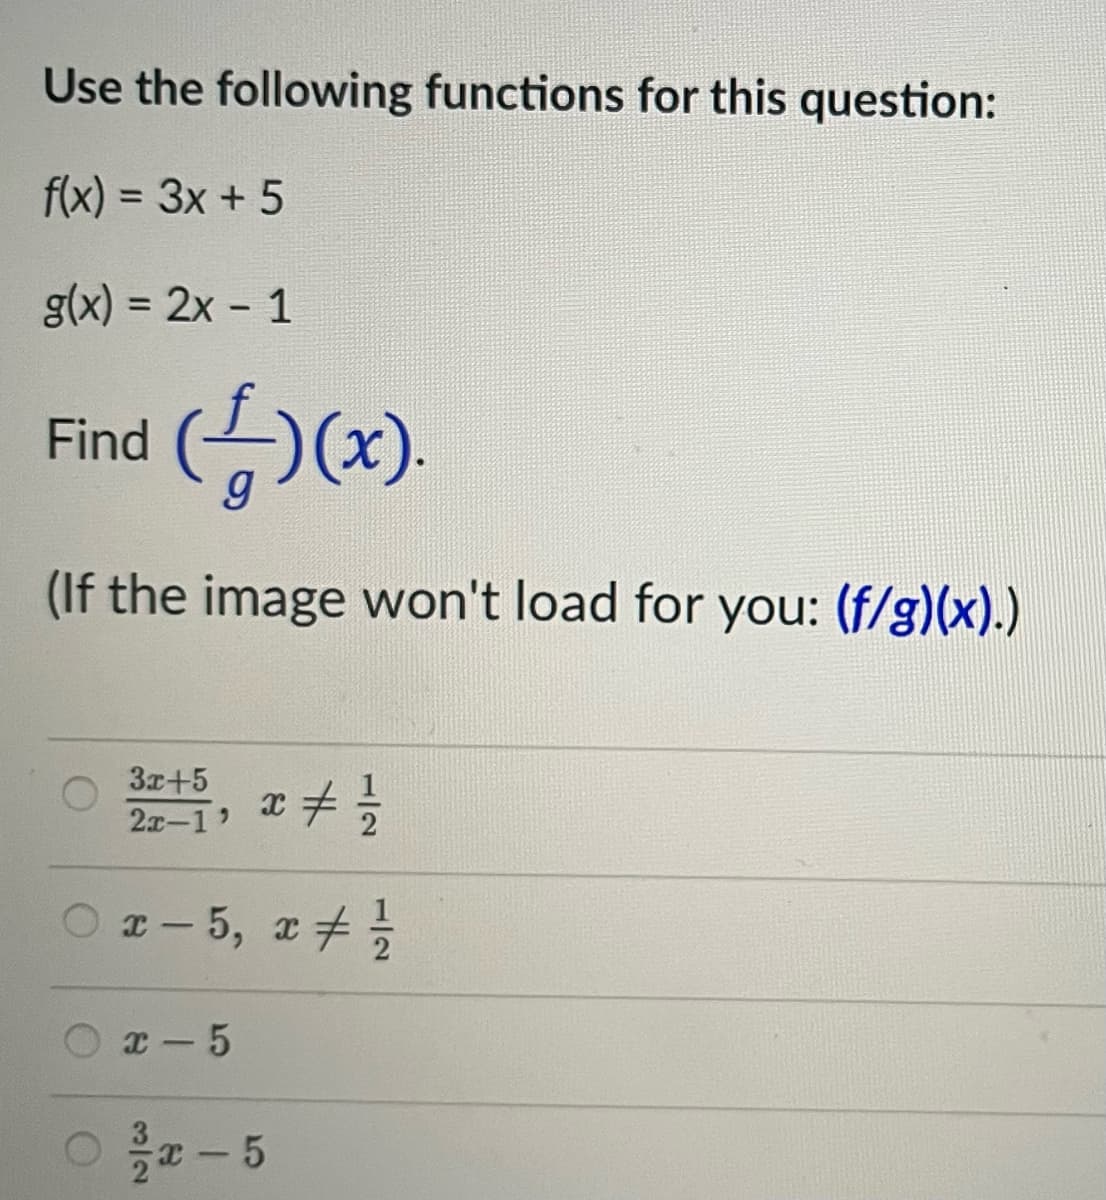 Use the following functions for this question:
f(x) = 3x + 5
g(x) = 2x - 1
Find
(4)(x).
(If the image won't load for you: (f/g)(x).)
3x+5
2x-1, x = 1/²/3
○x-5, x # 1/1/20
x-5
O
x-5